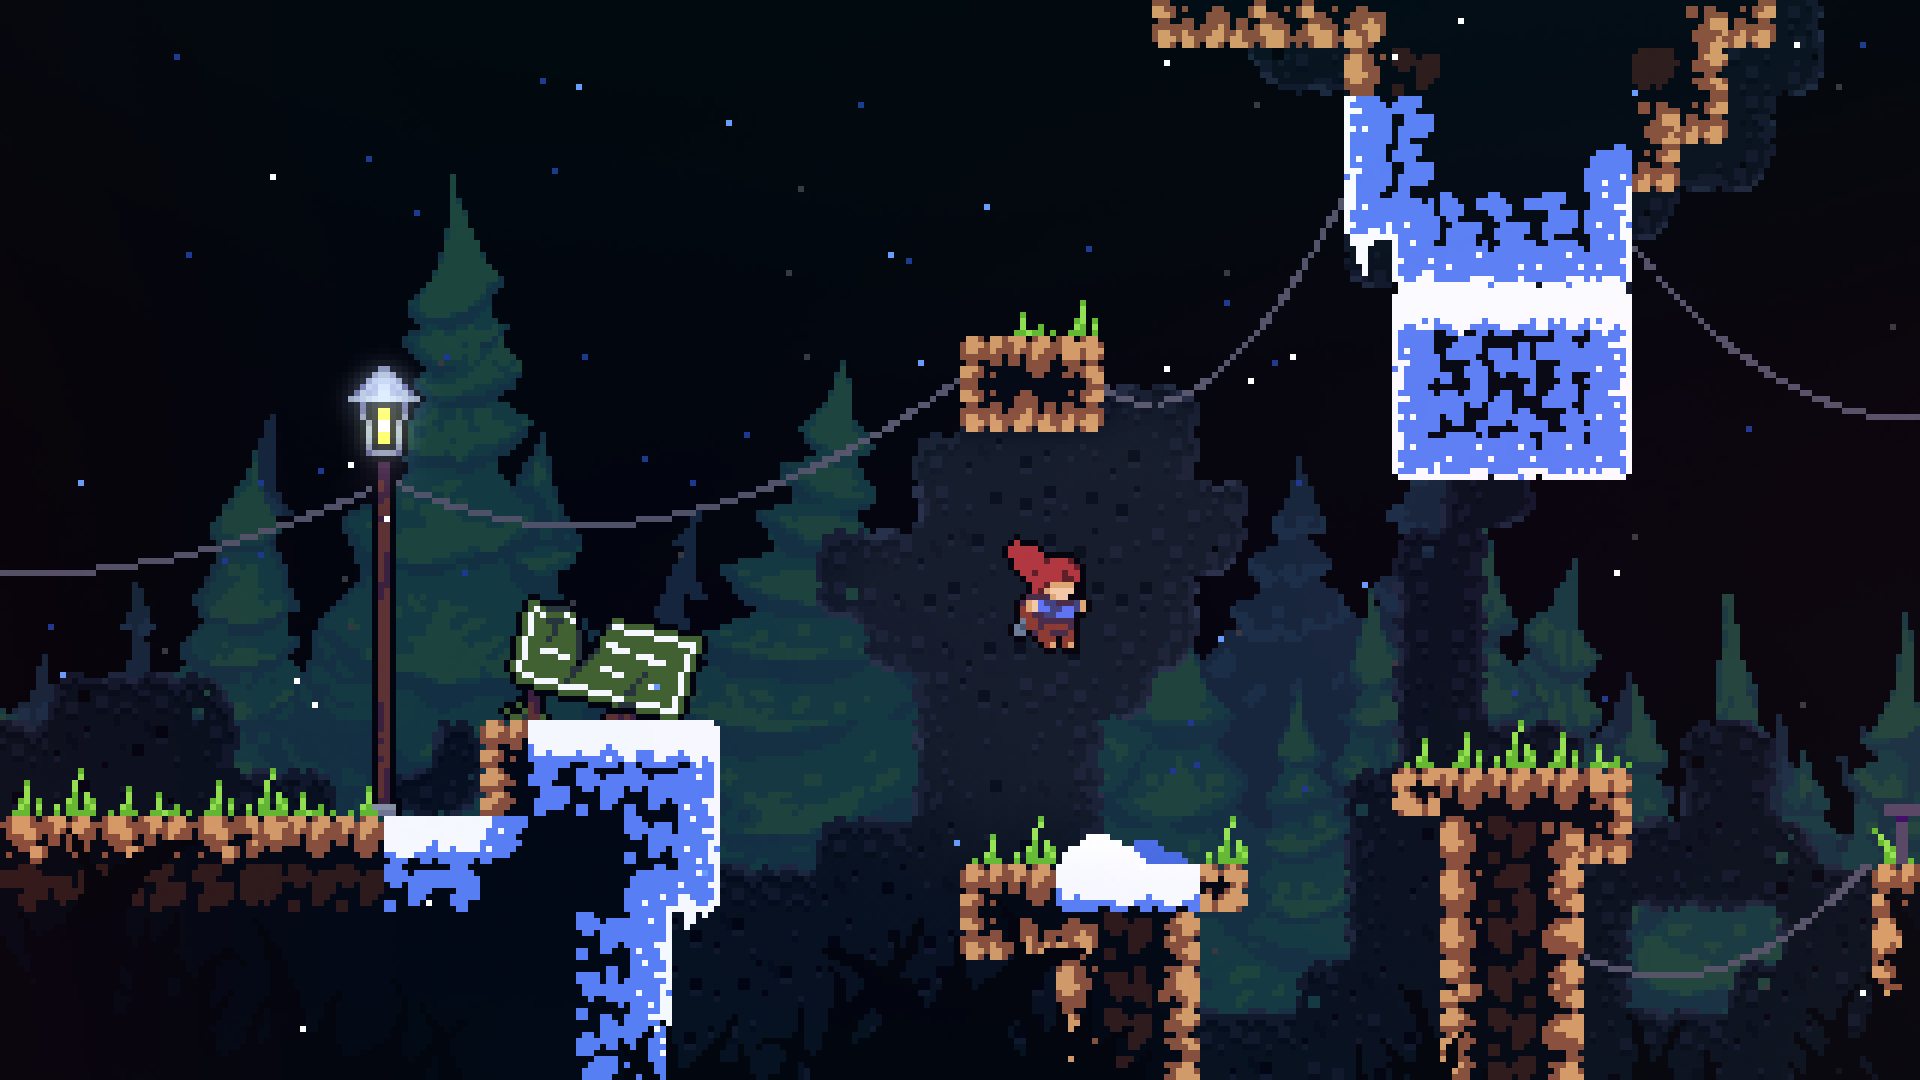 Celeste Delayed to January 2018 for PC, PS4, and Switch